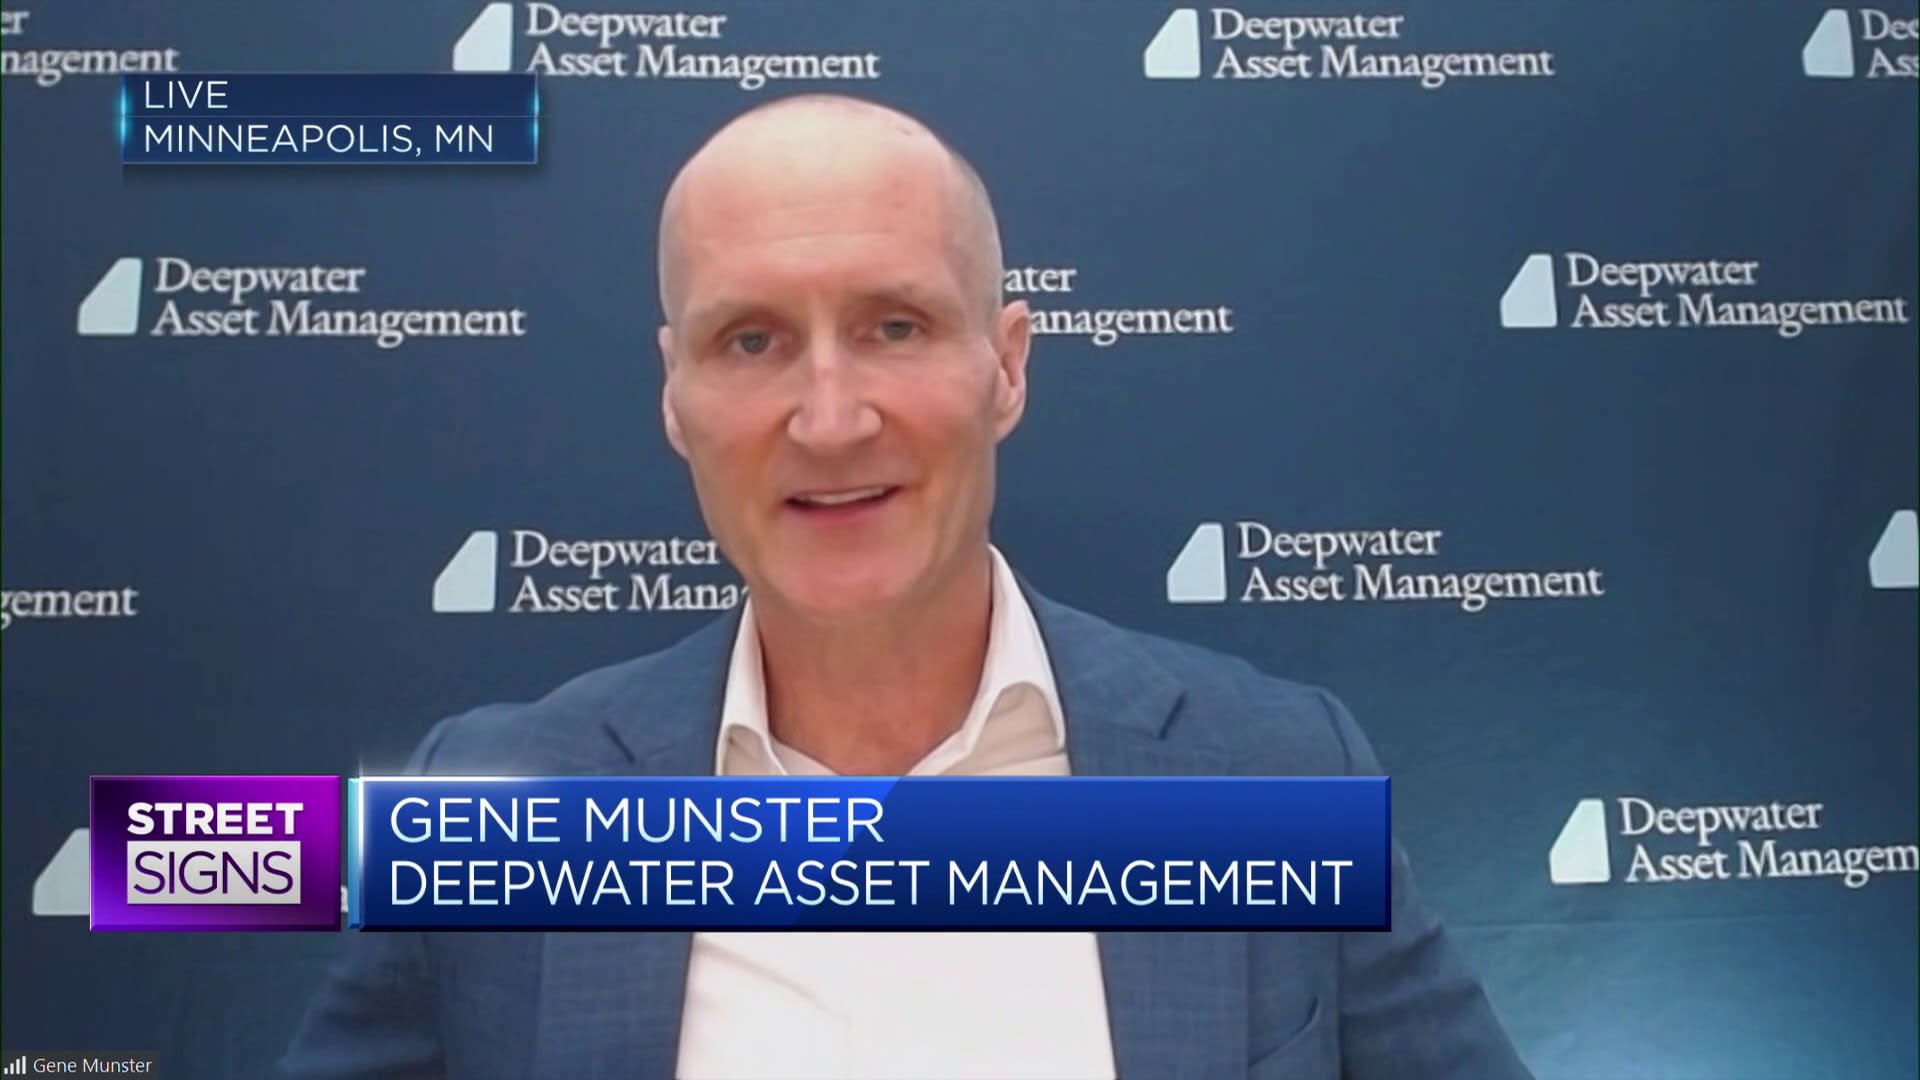 It's a 'messy decade' for traditional automakers, says Deepwater's Gene Munster